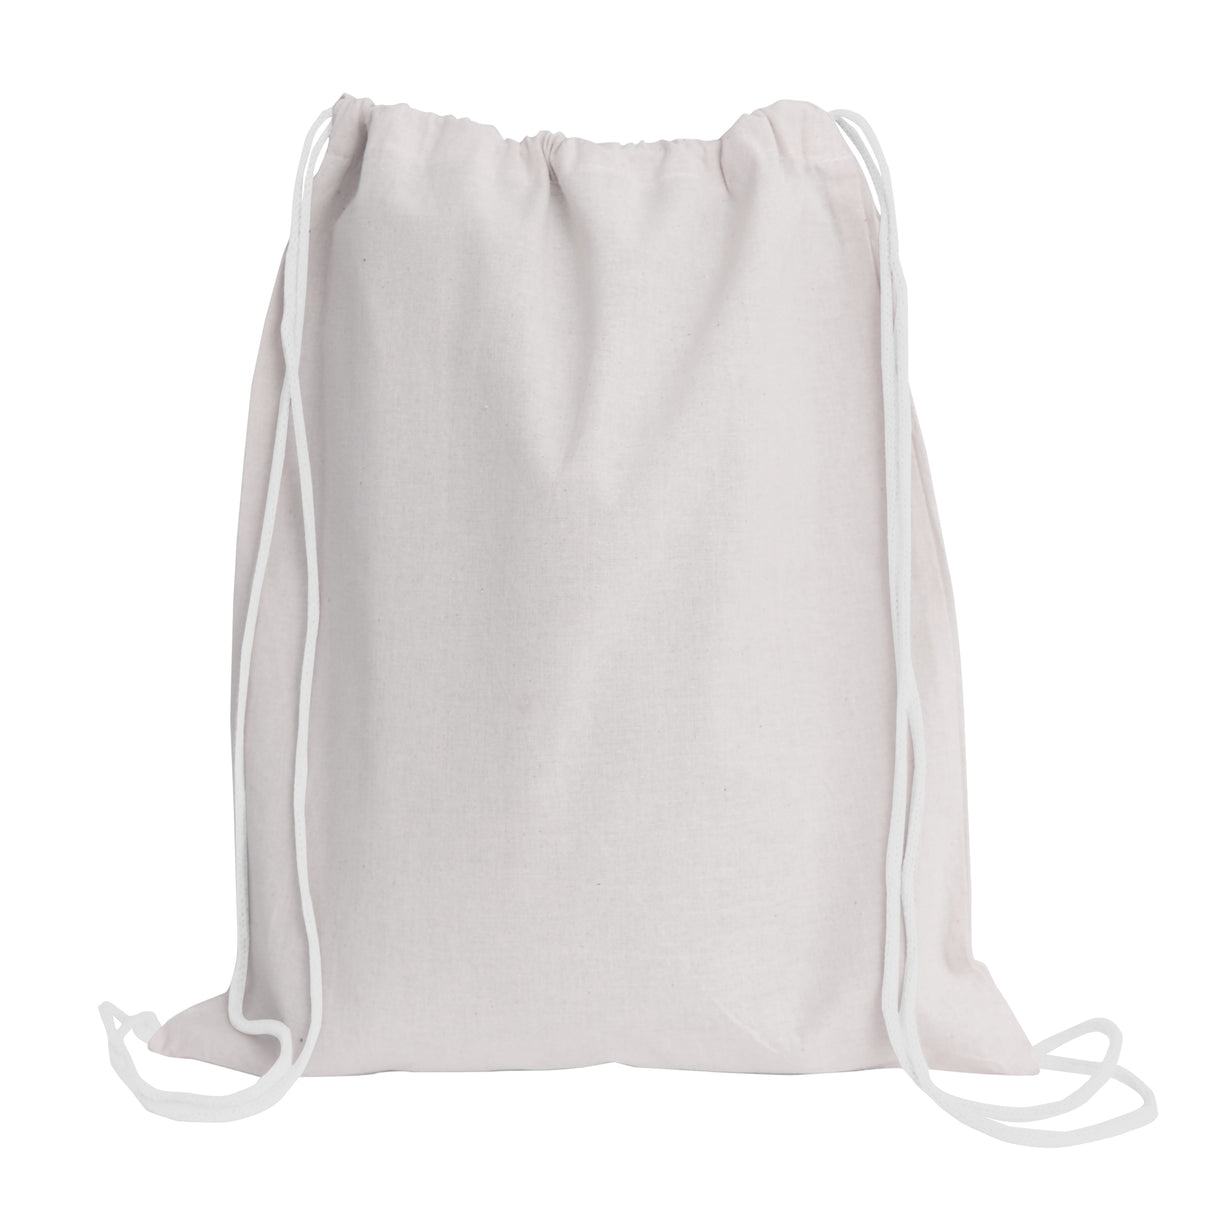 Affordable White Cotton Drawstring Bags